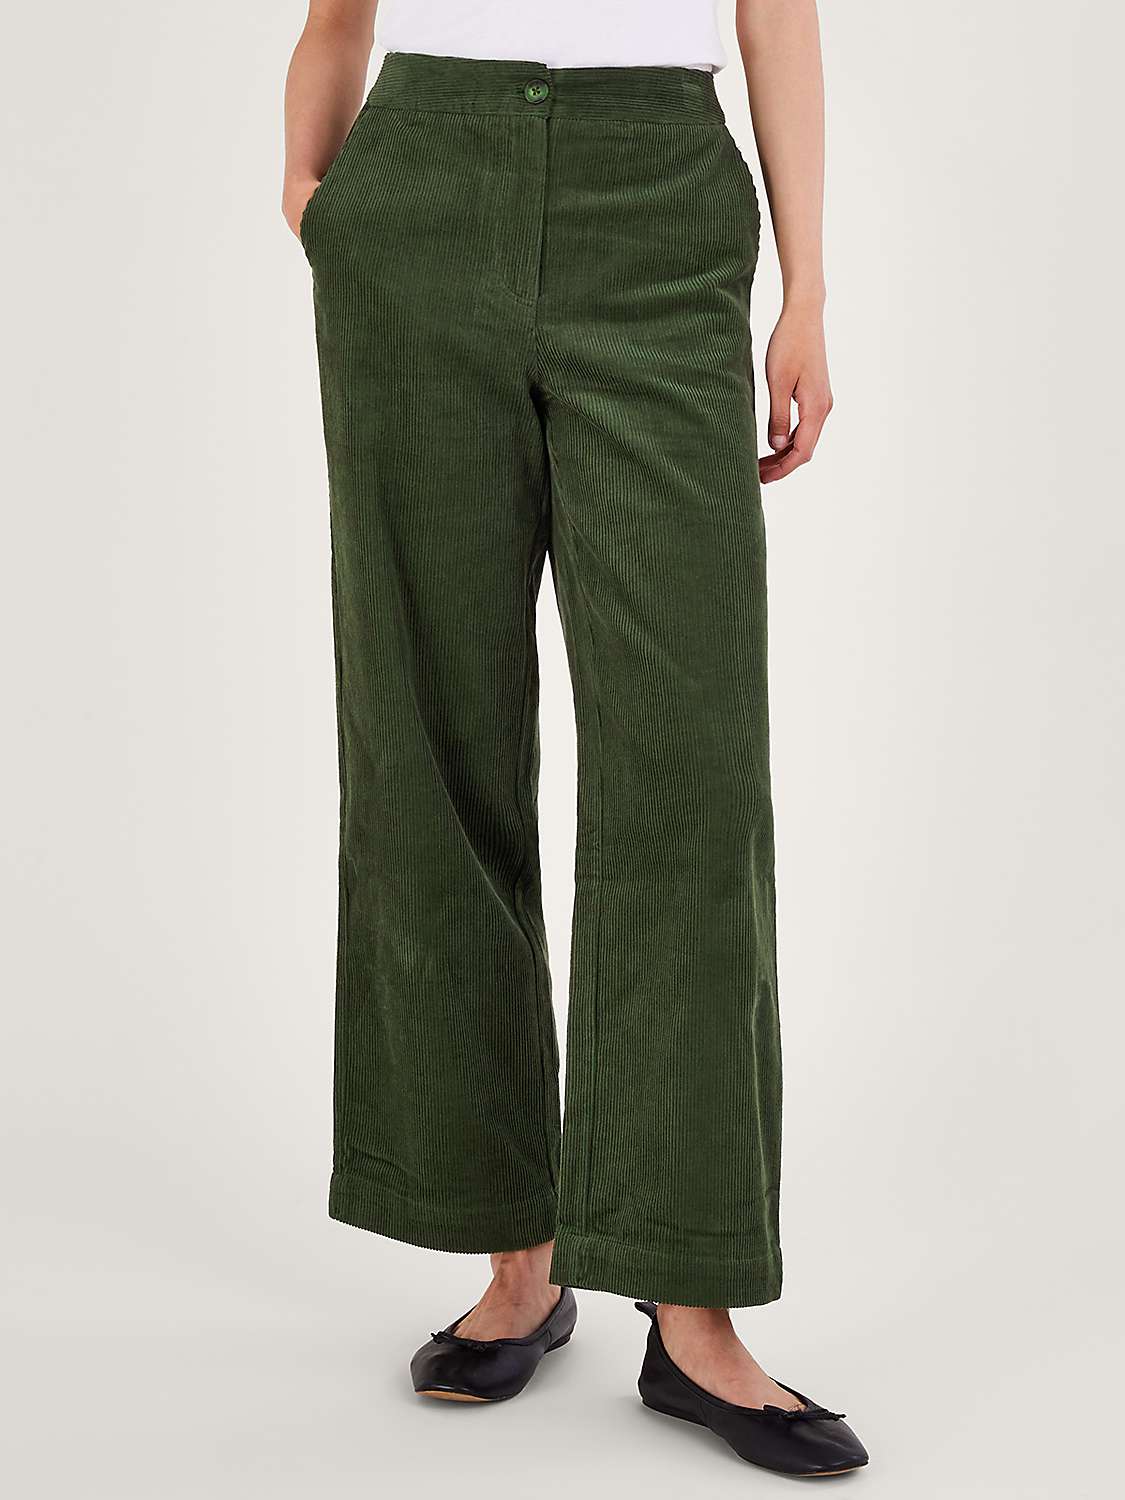 Buy Monsoon Cord Wide Leg Trousers Online at johnlewis.com